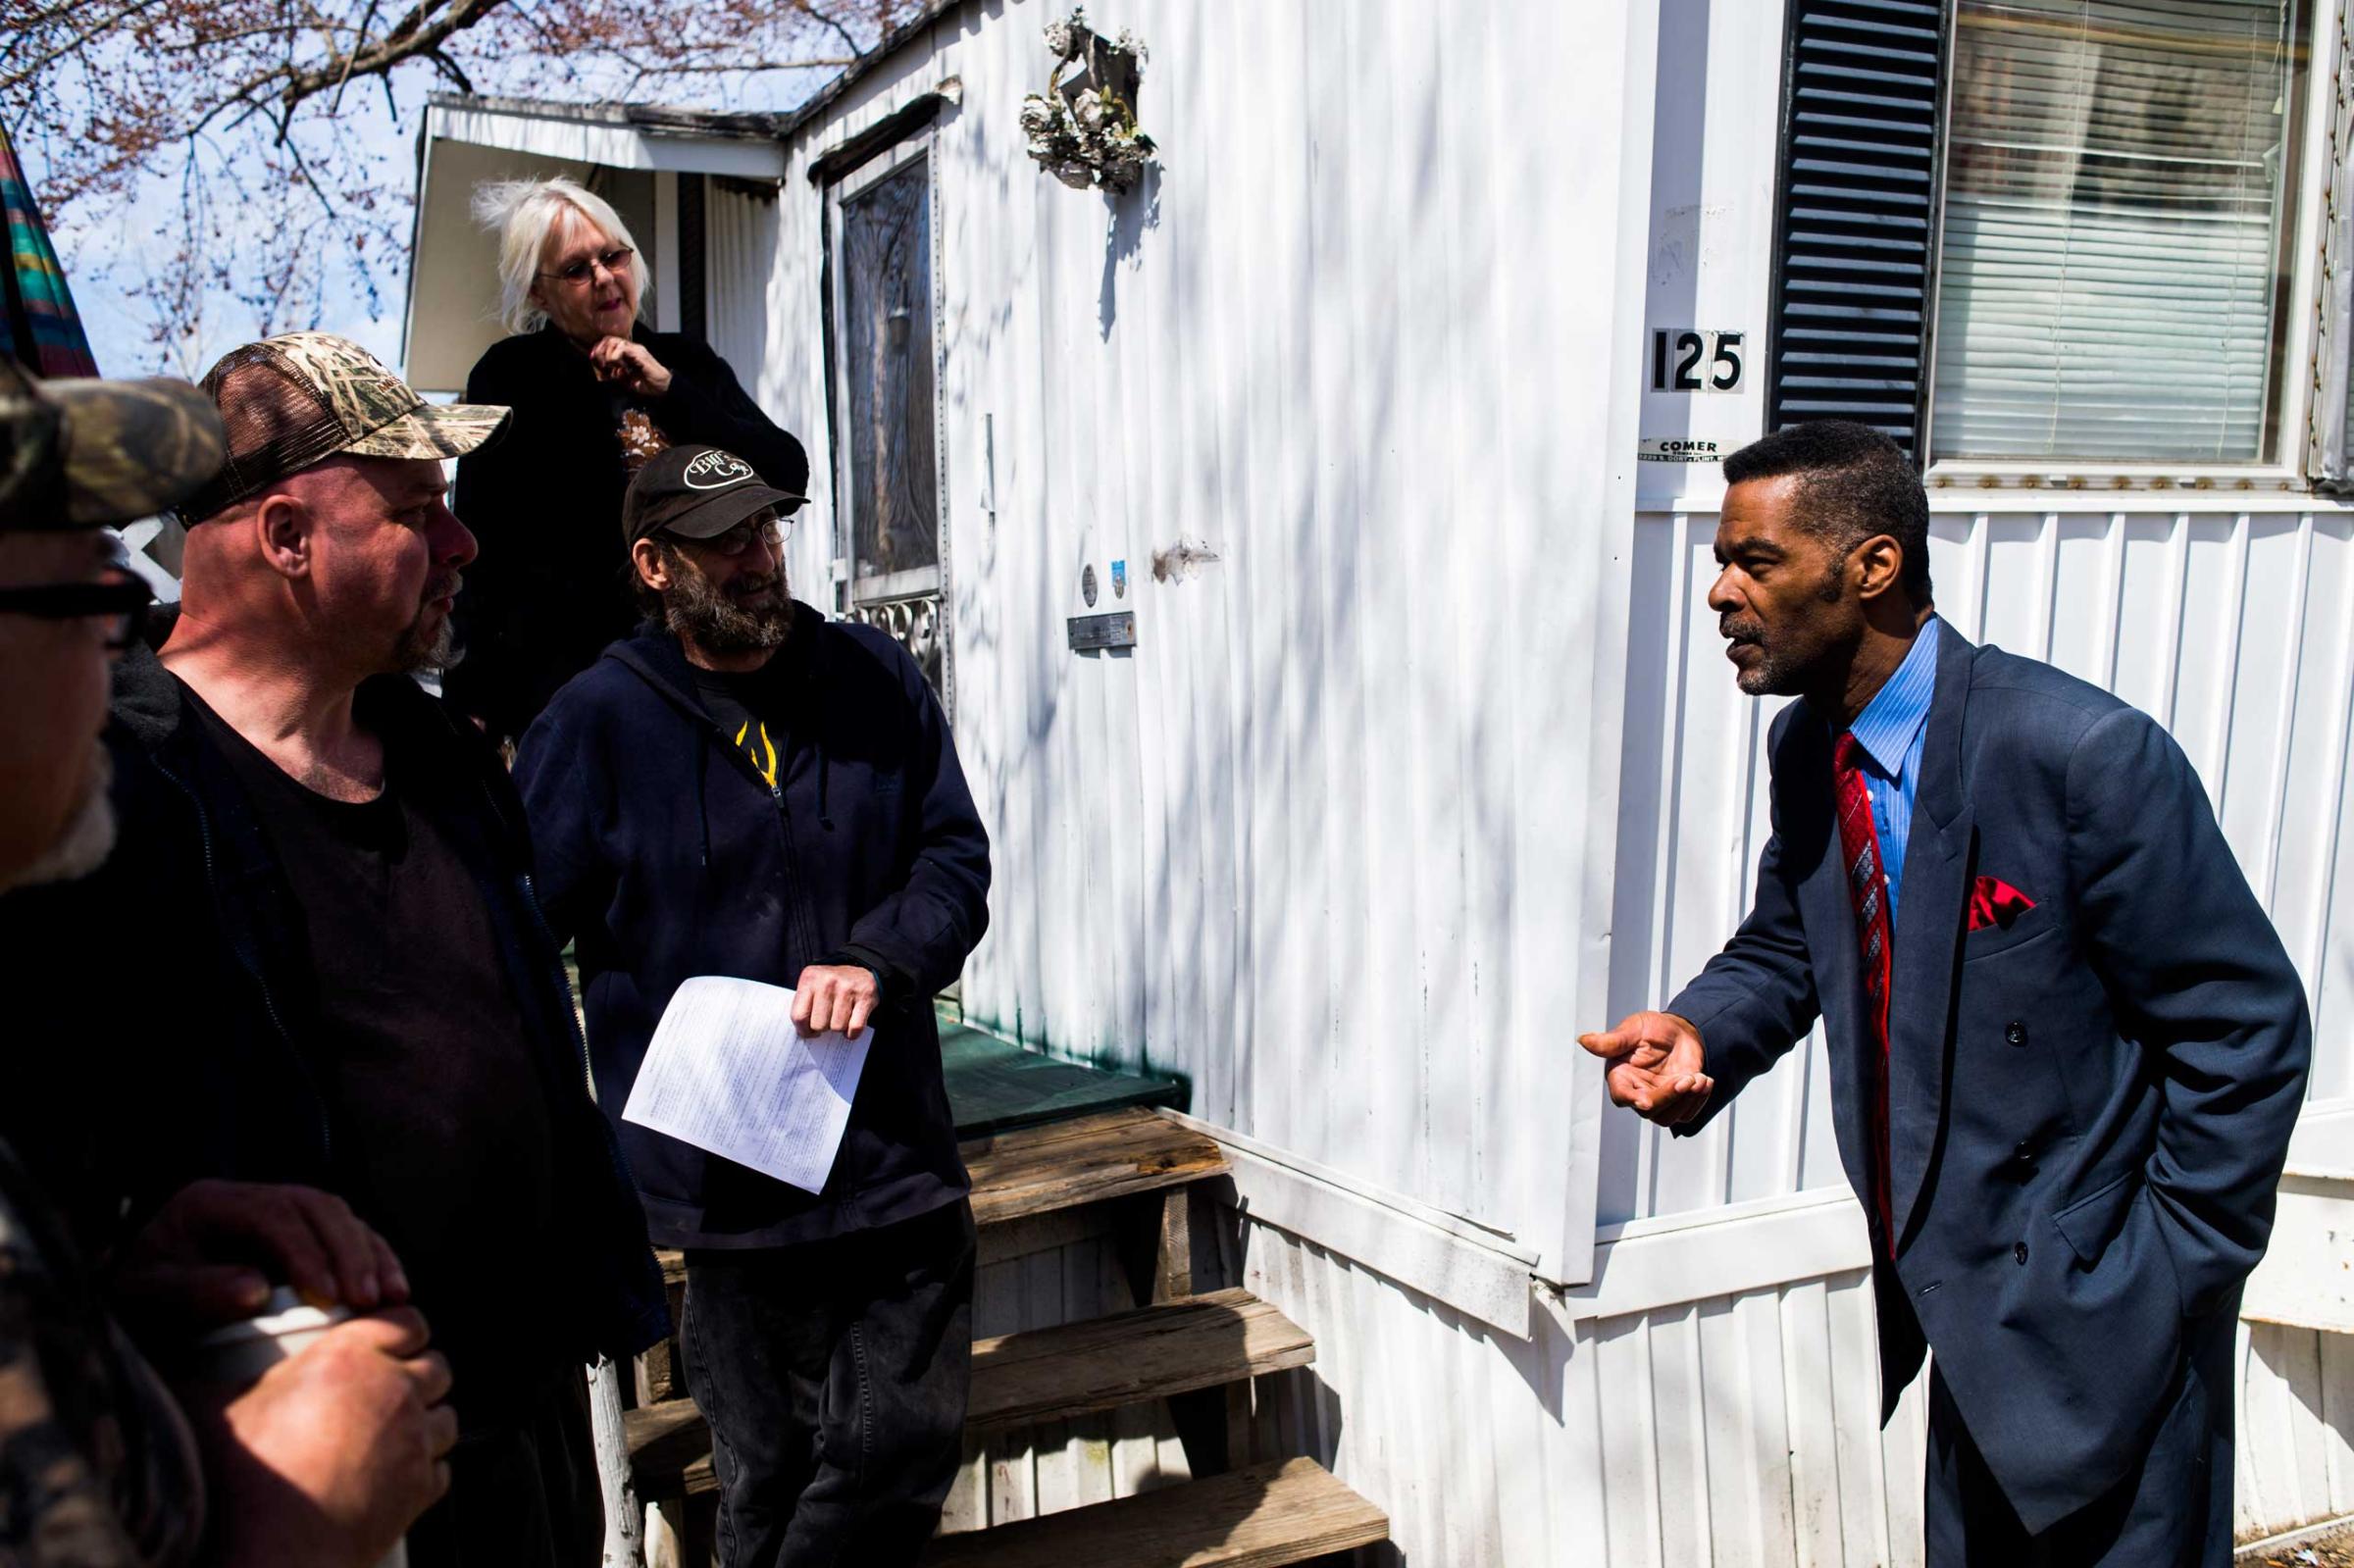 Flint City councilman Eric Mays speaks with concerned residents at Ambassador East mobile home park on April 15, 2015, in Flint, Mich. The city of Flint plans to install a $1.5 million granulated active-charcoal filter by mid-July in an effort to address concerns over its water quality.